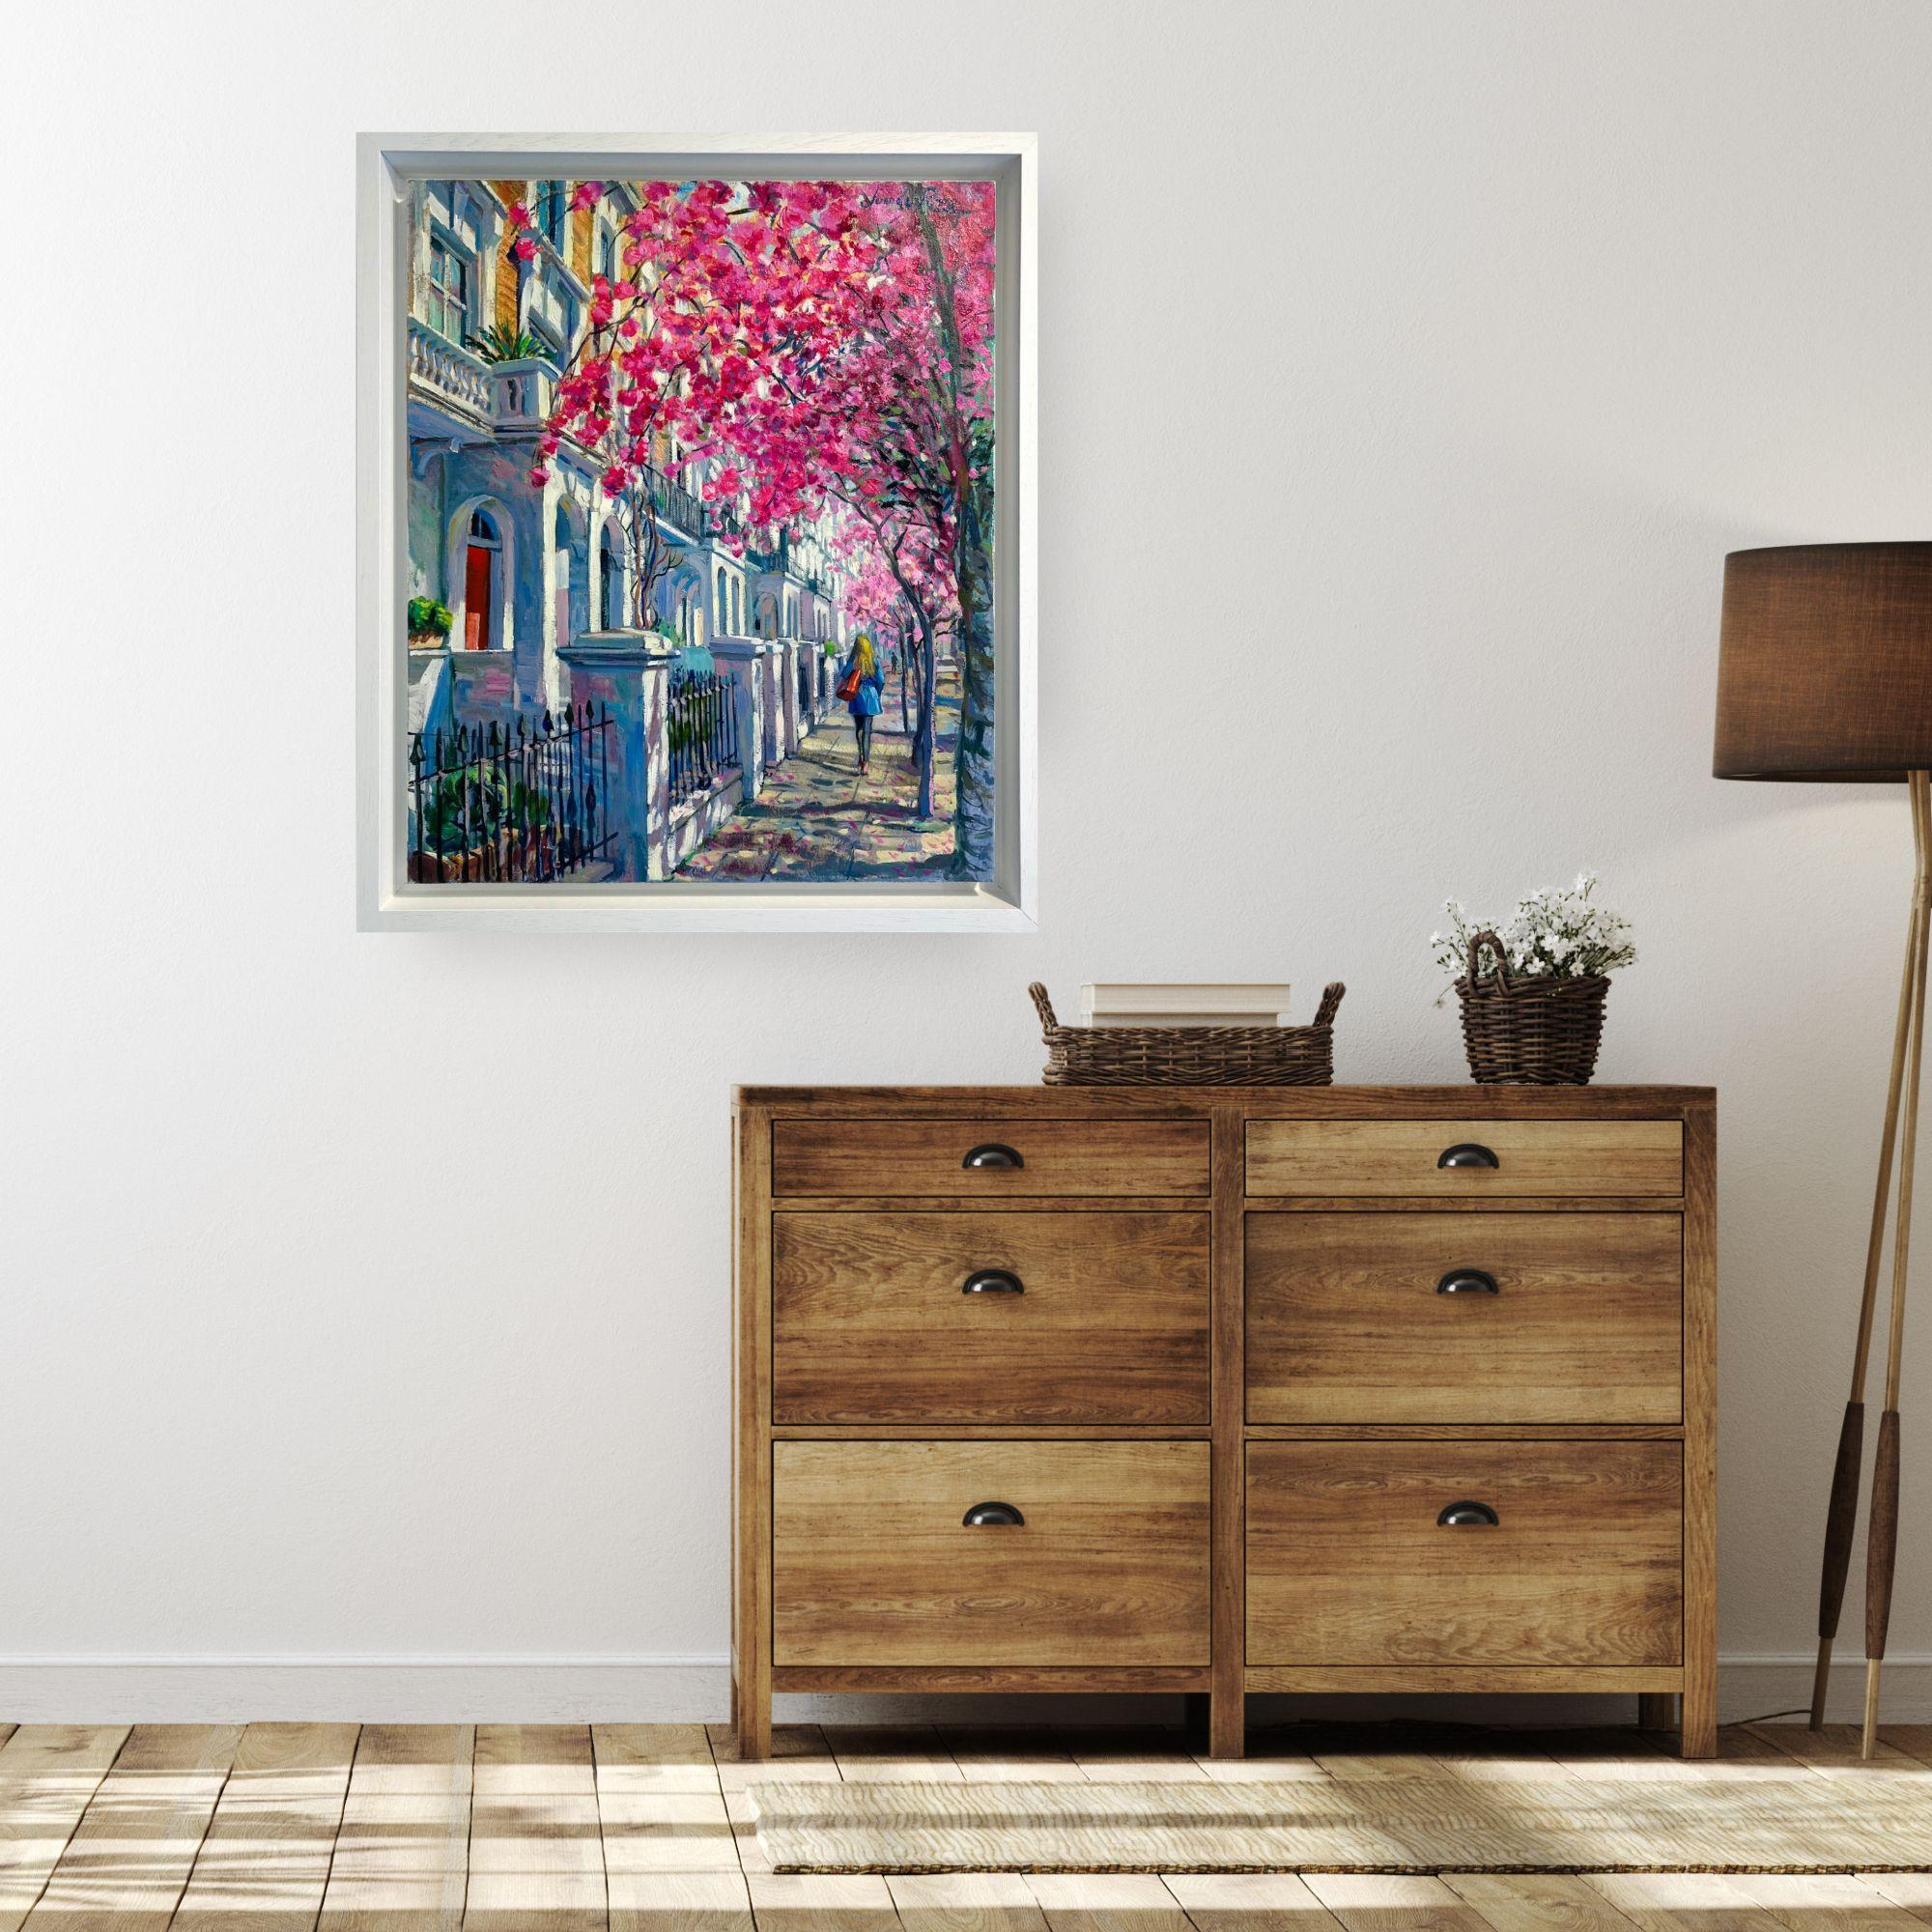 Walking Under Blossom-original impressionism cityscape blossoms oil painting-art For Sale 1